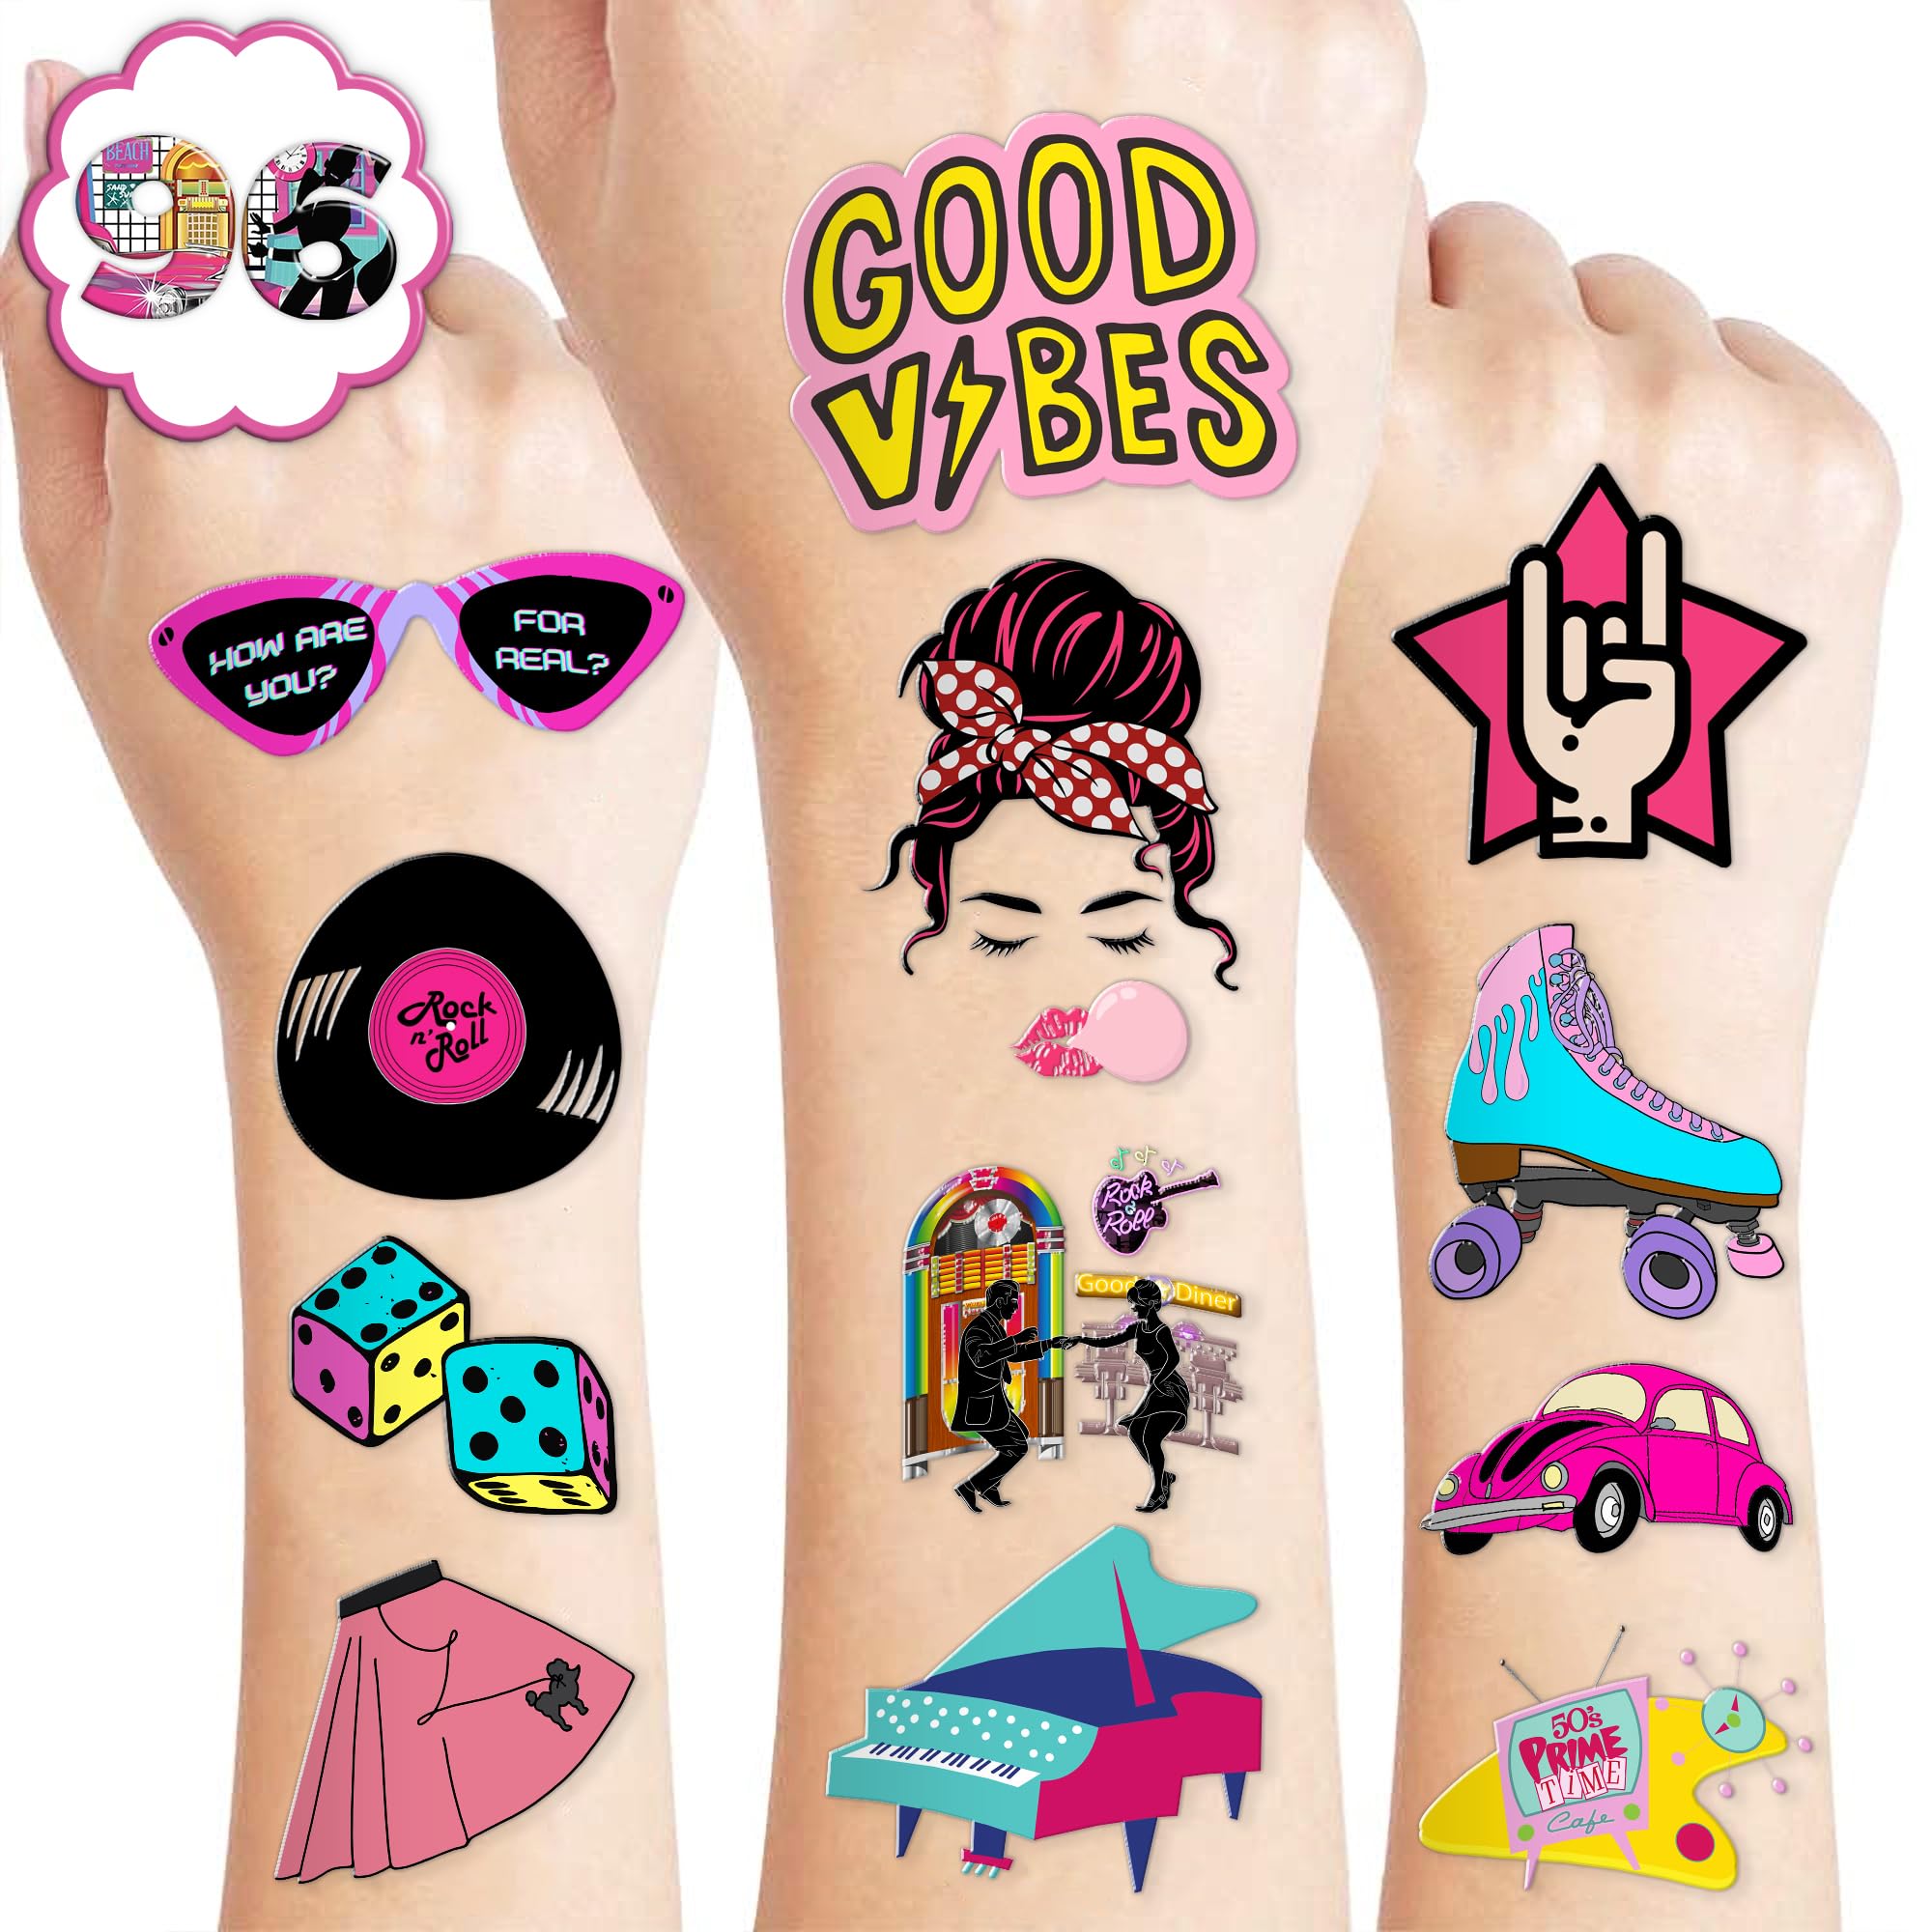 50s Temporary Tattoos for Fans, Themed 50s Birthday Party Decorations Favors Party Supplies 96PCS Tattoo Sticker Women Men Gifts Boys Girls Classroom School Prizes